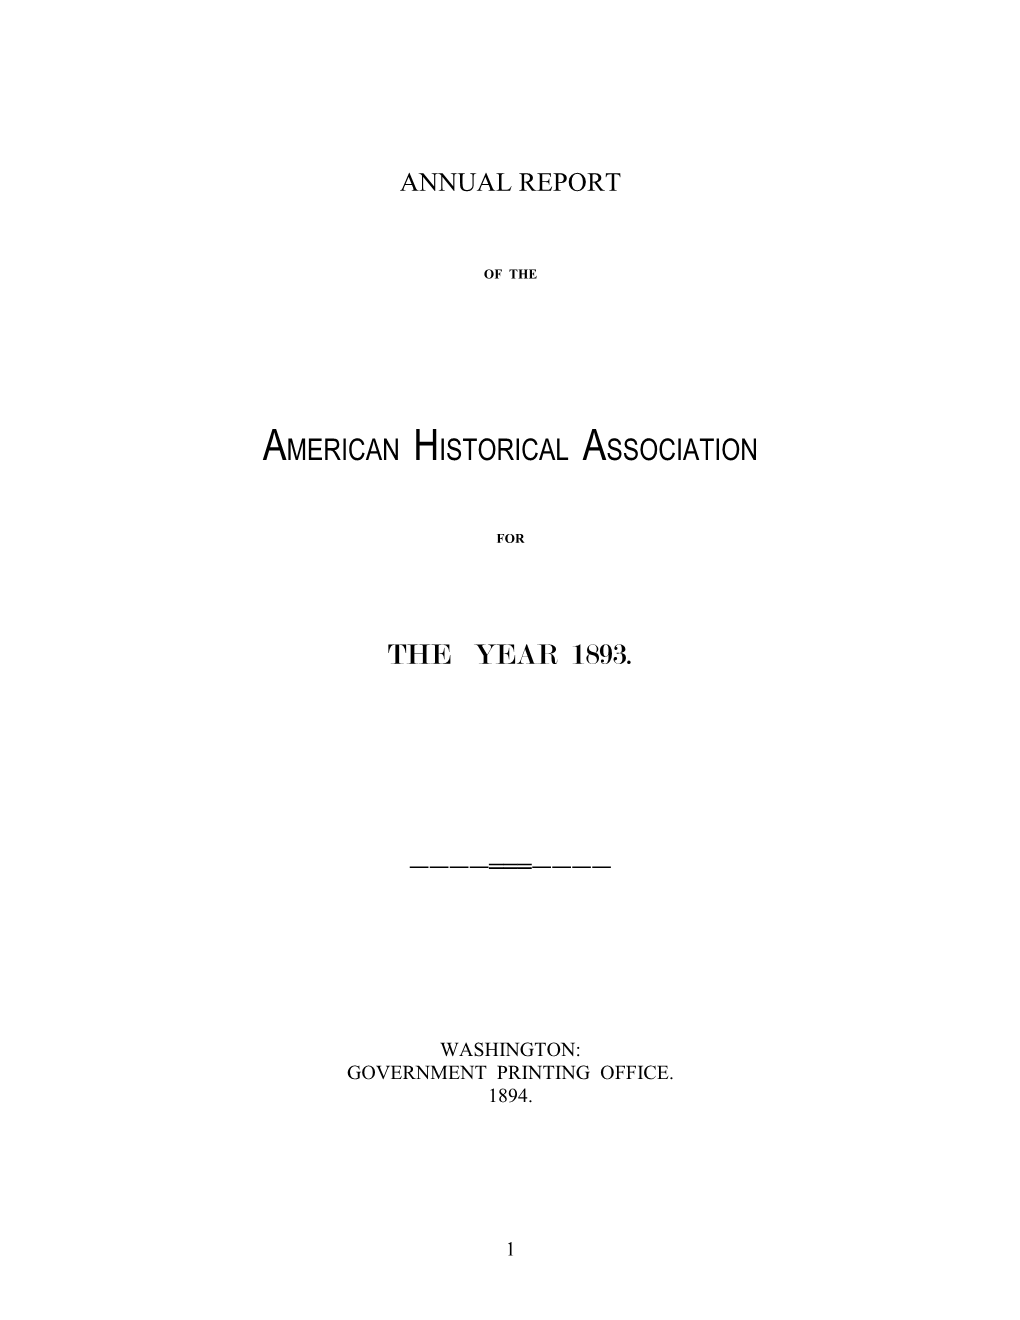 American Historical Association the Year 1893